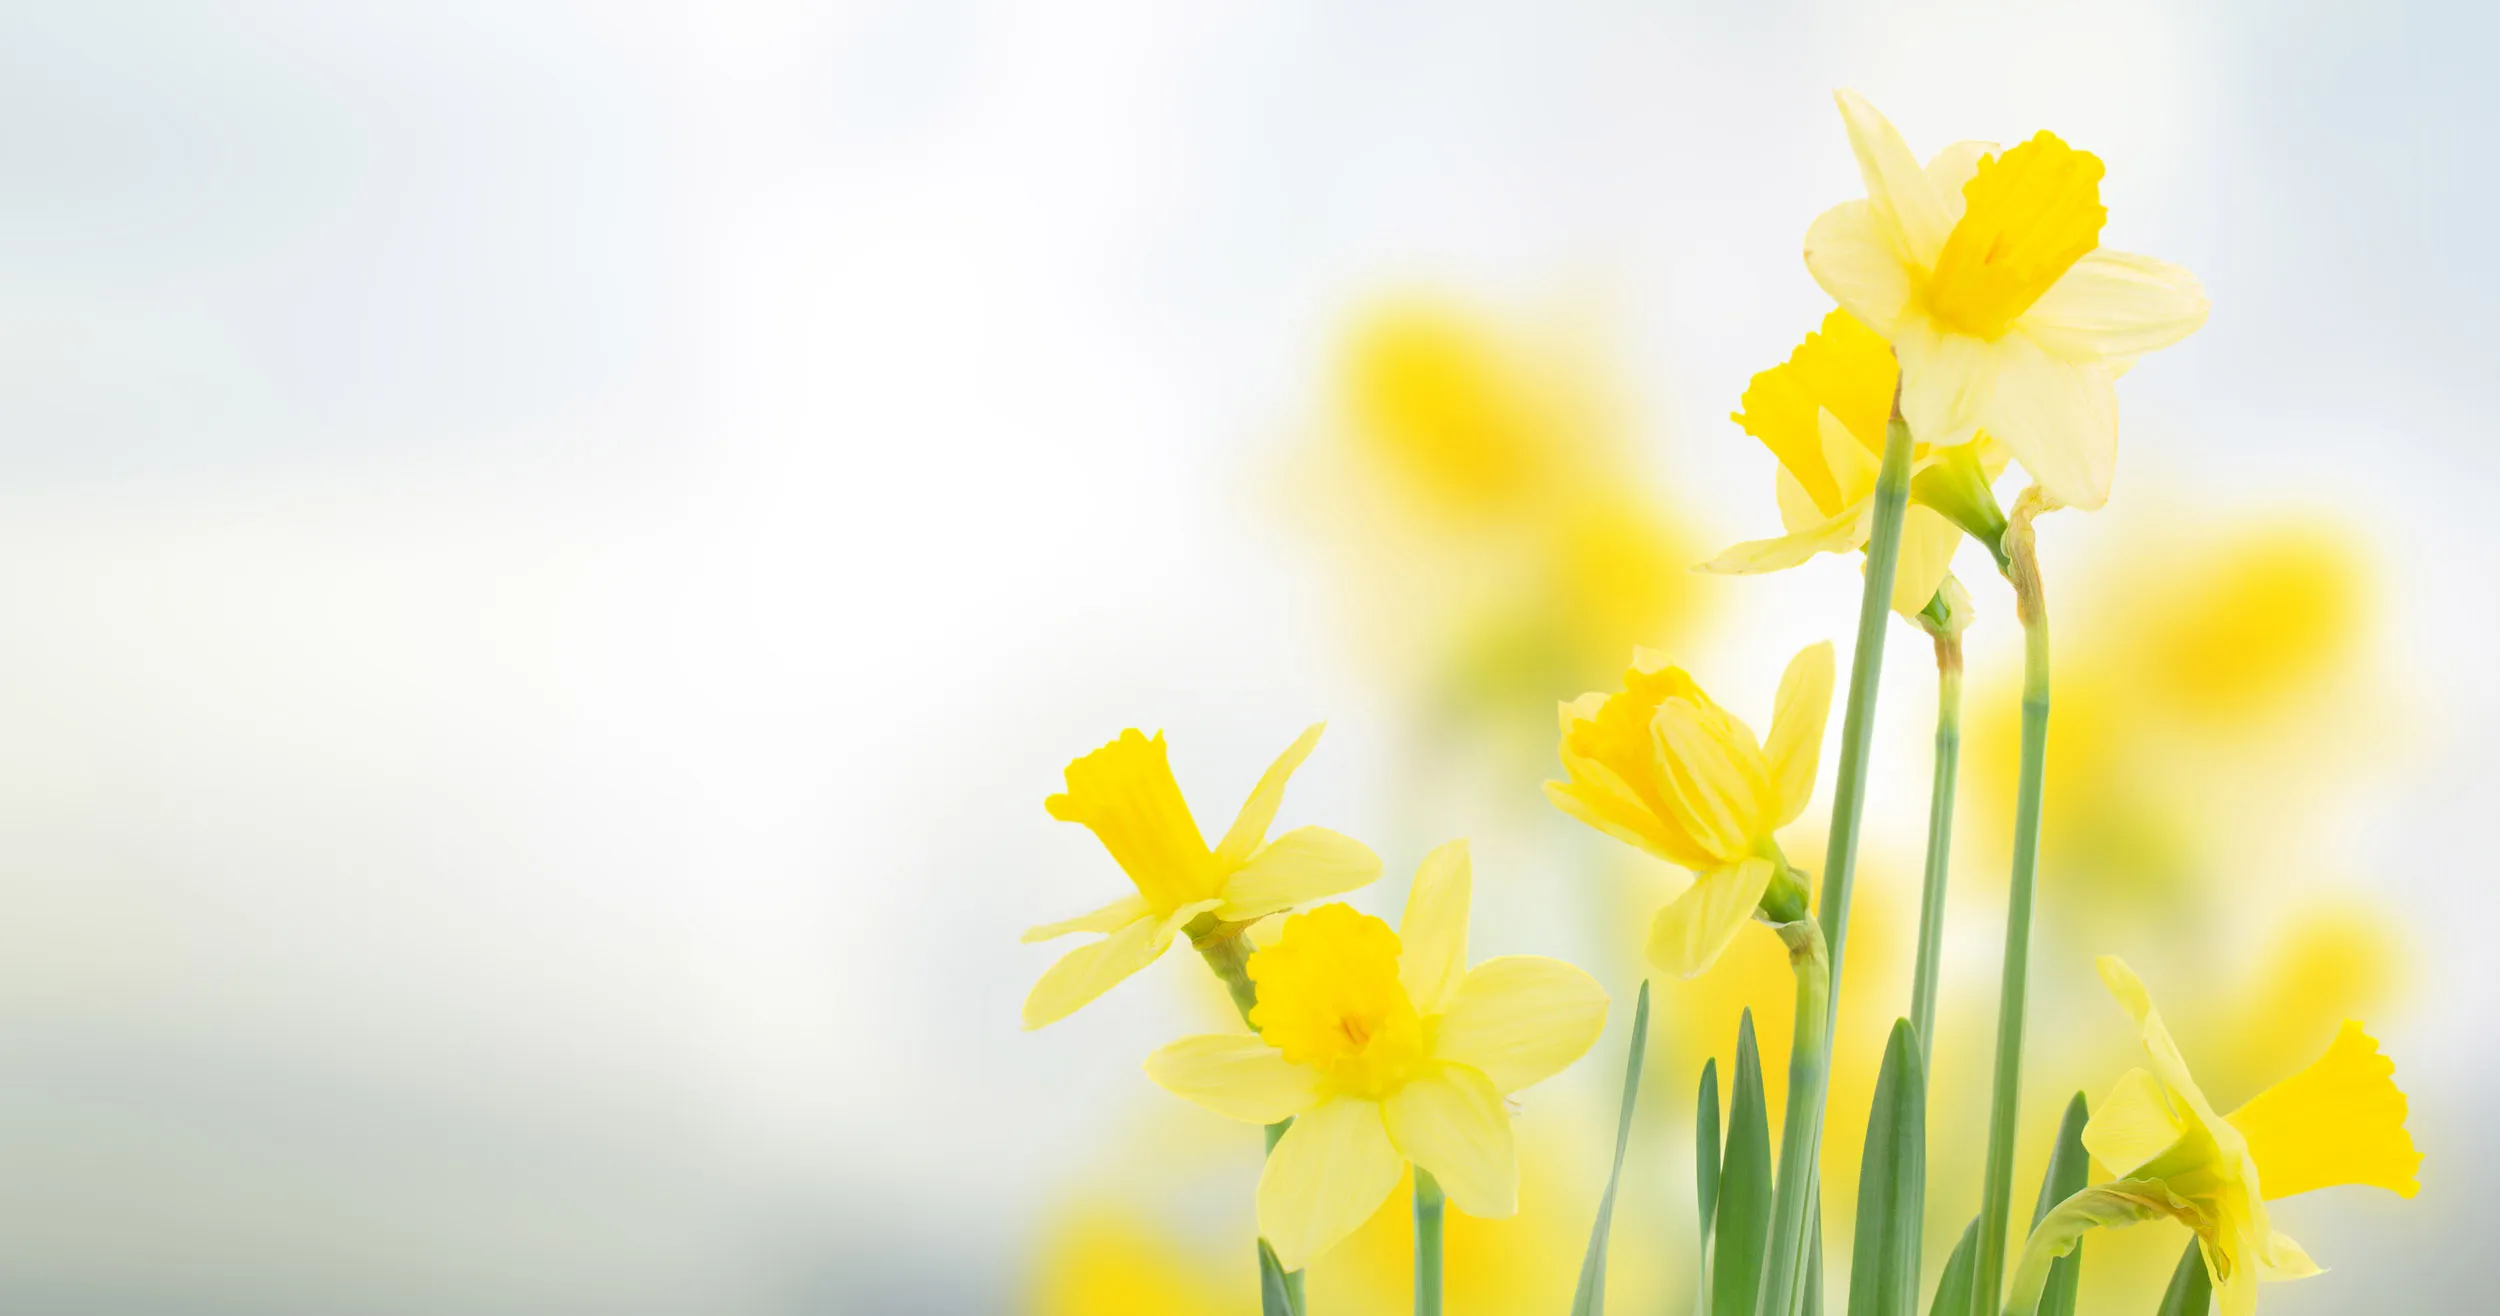 Yellow Daffodils with a blurred background.